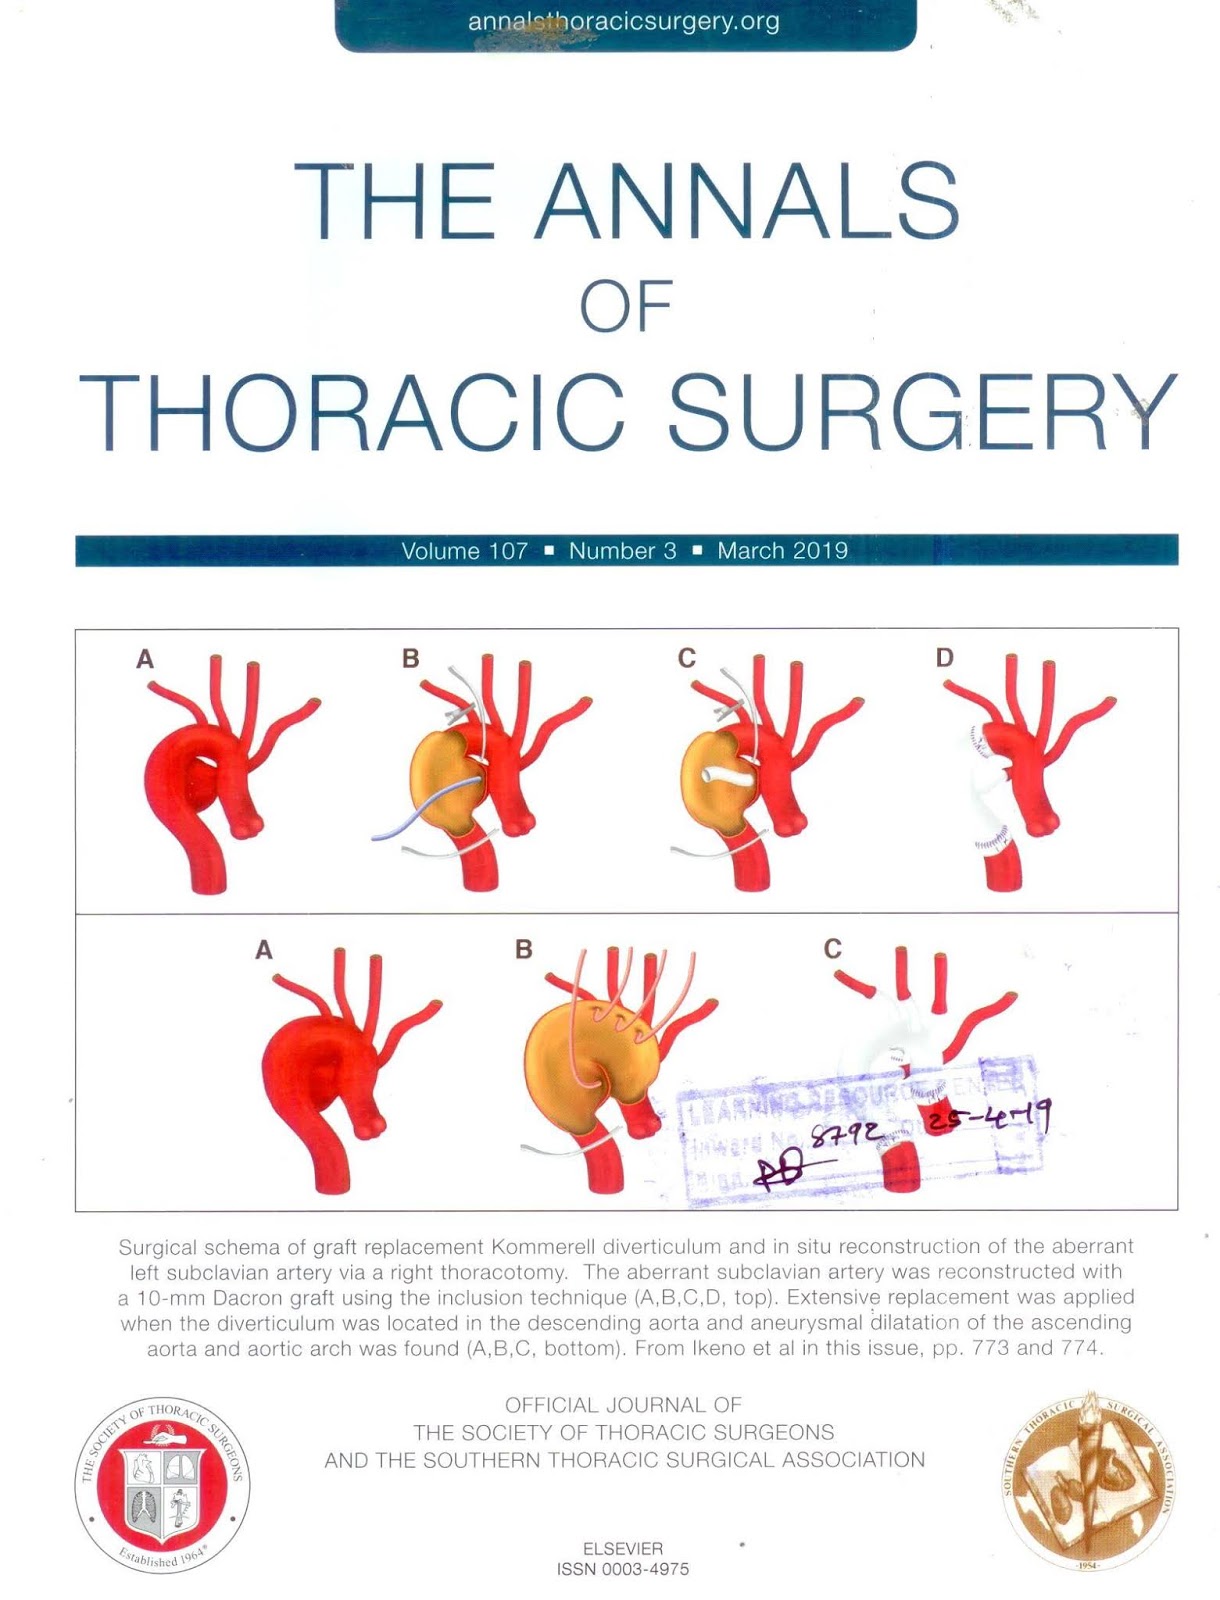 https://www.sciencedirect.com/journal/the-annals-of-thoracic-surgery/vol/107/issue/3